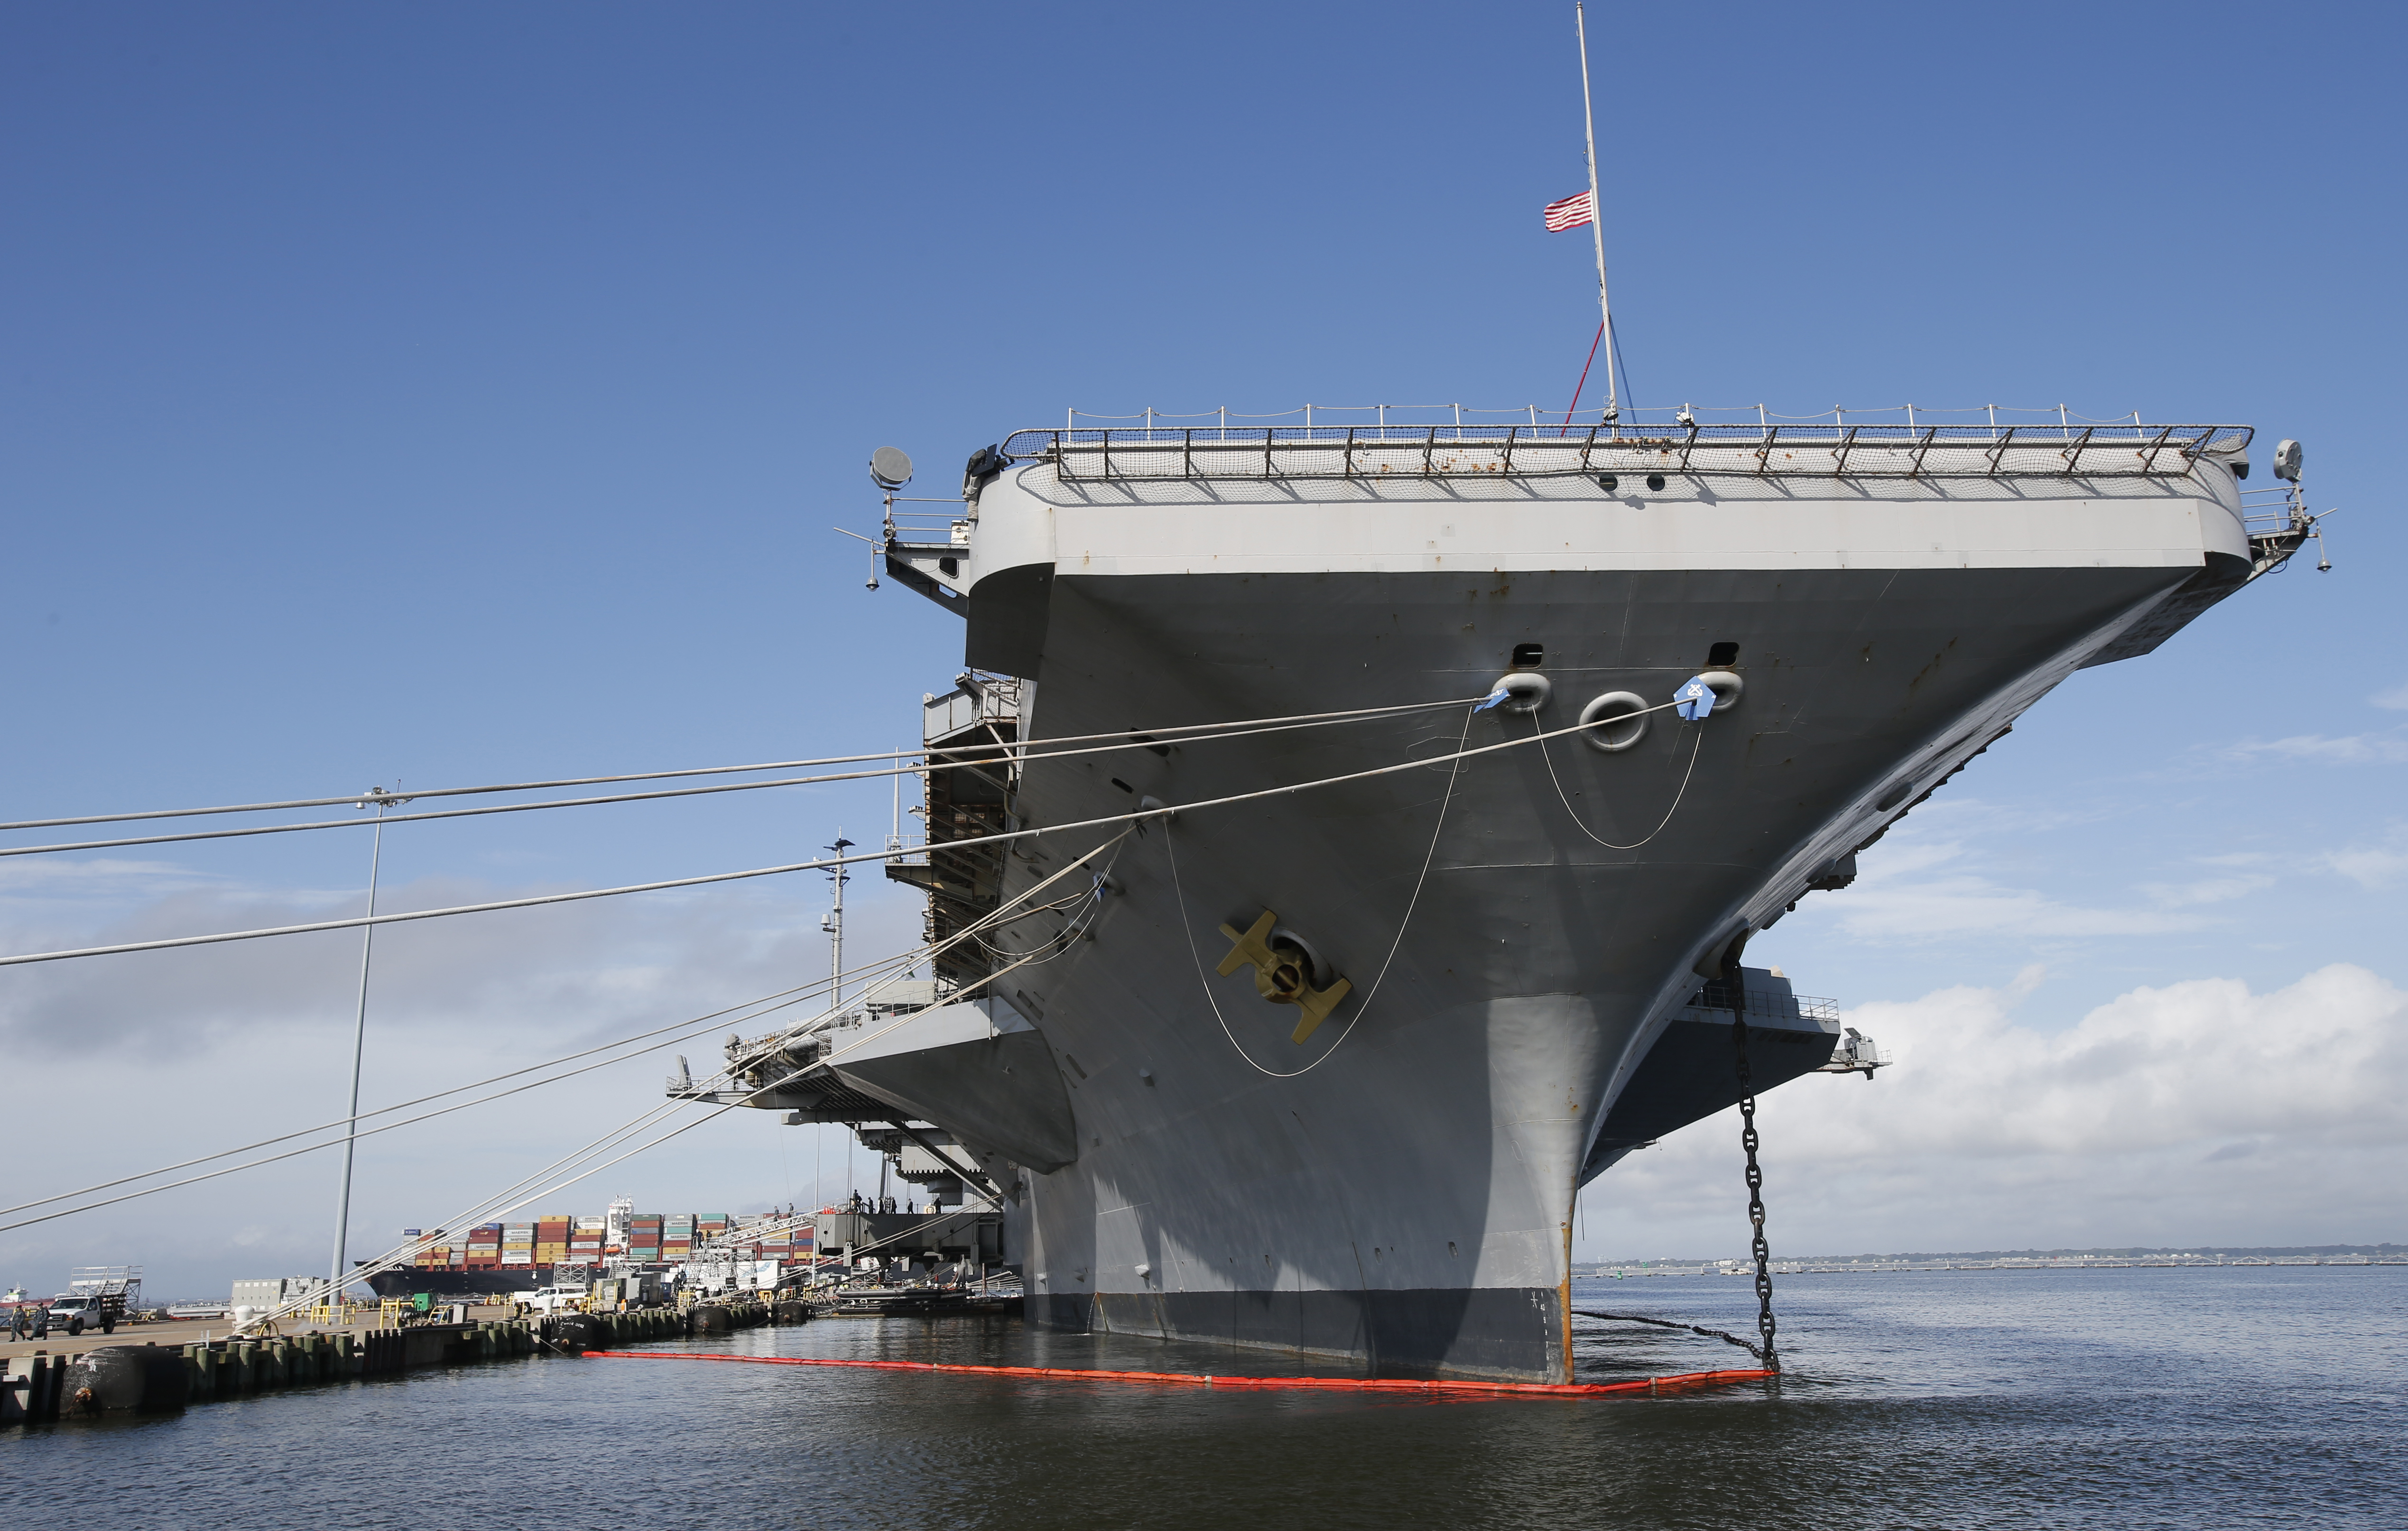 FILE - The nuclear aircraft carrier USS George Washington pier side at Norfolk Naval Station in Norfolk, Va., Sept. 30, 2016. A Navy investigation triggered by a series of suicides is recommending widespread improvements in housing, food, parking and internet for sailors, as well as changes to mental health and other personnel programs. The investigation began last year after seven service members assigned to the aircraft carrier USS George Washington died over a 12-month period ending April 2022, including three in one week. The carrier was docked for overhaul at Newport News shipyard. (AP Photo/Steve Helber, File)